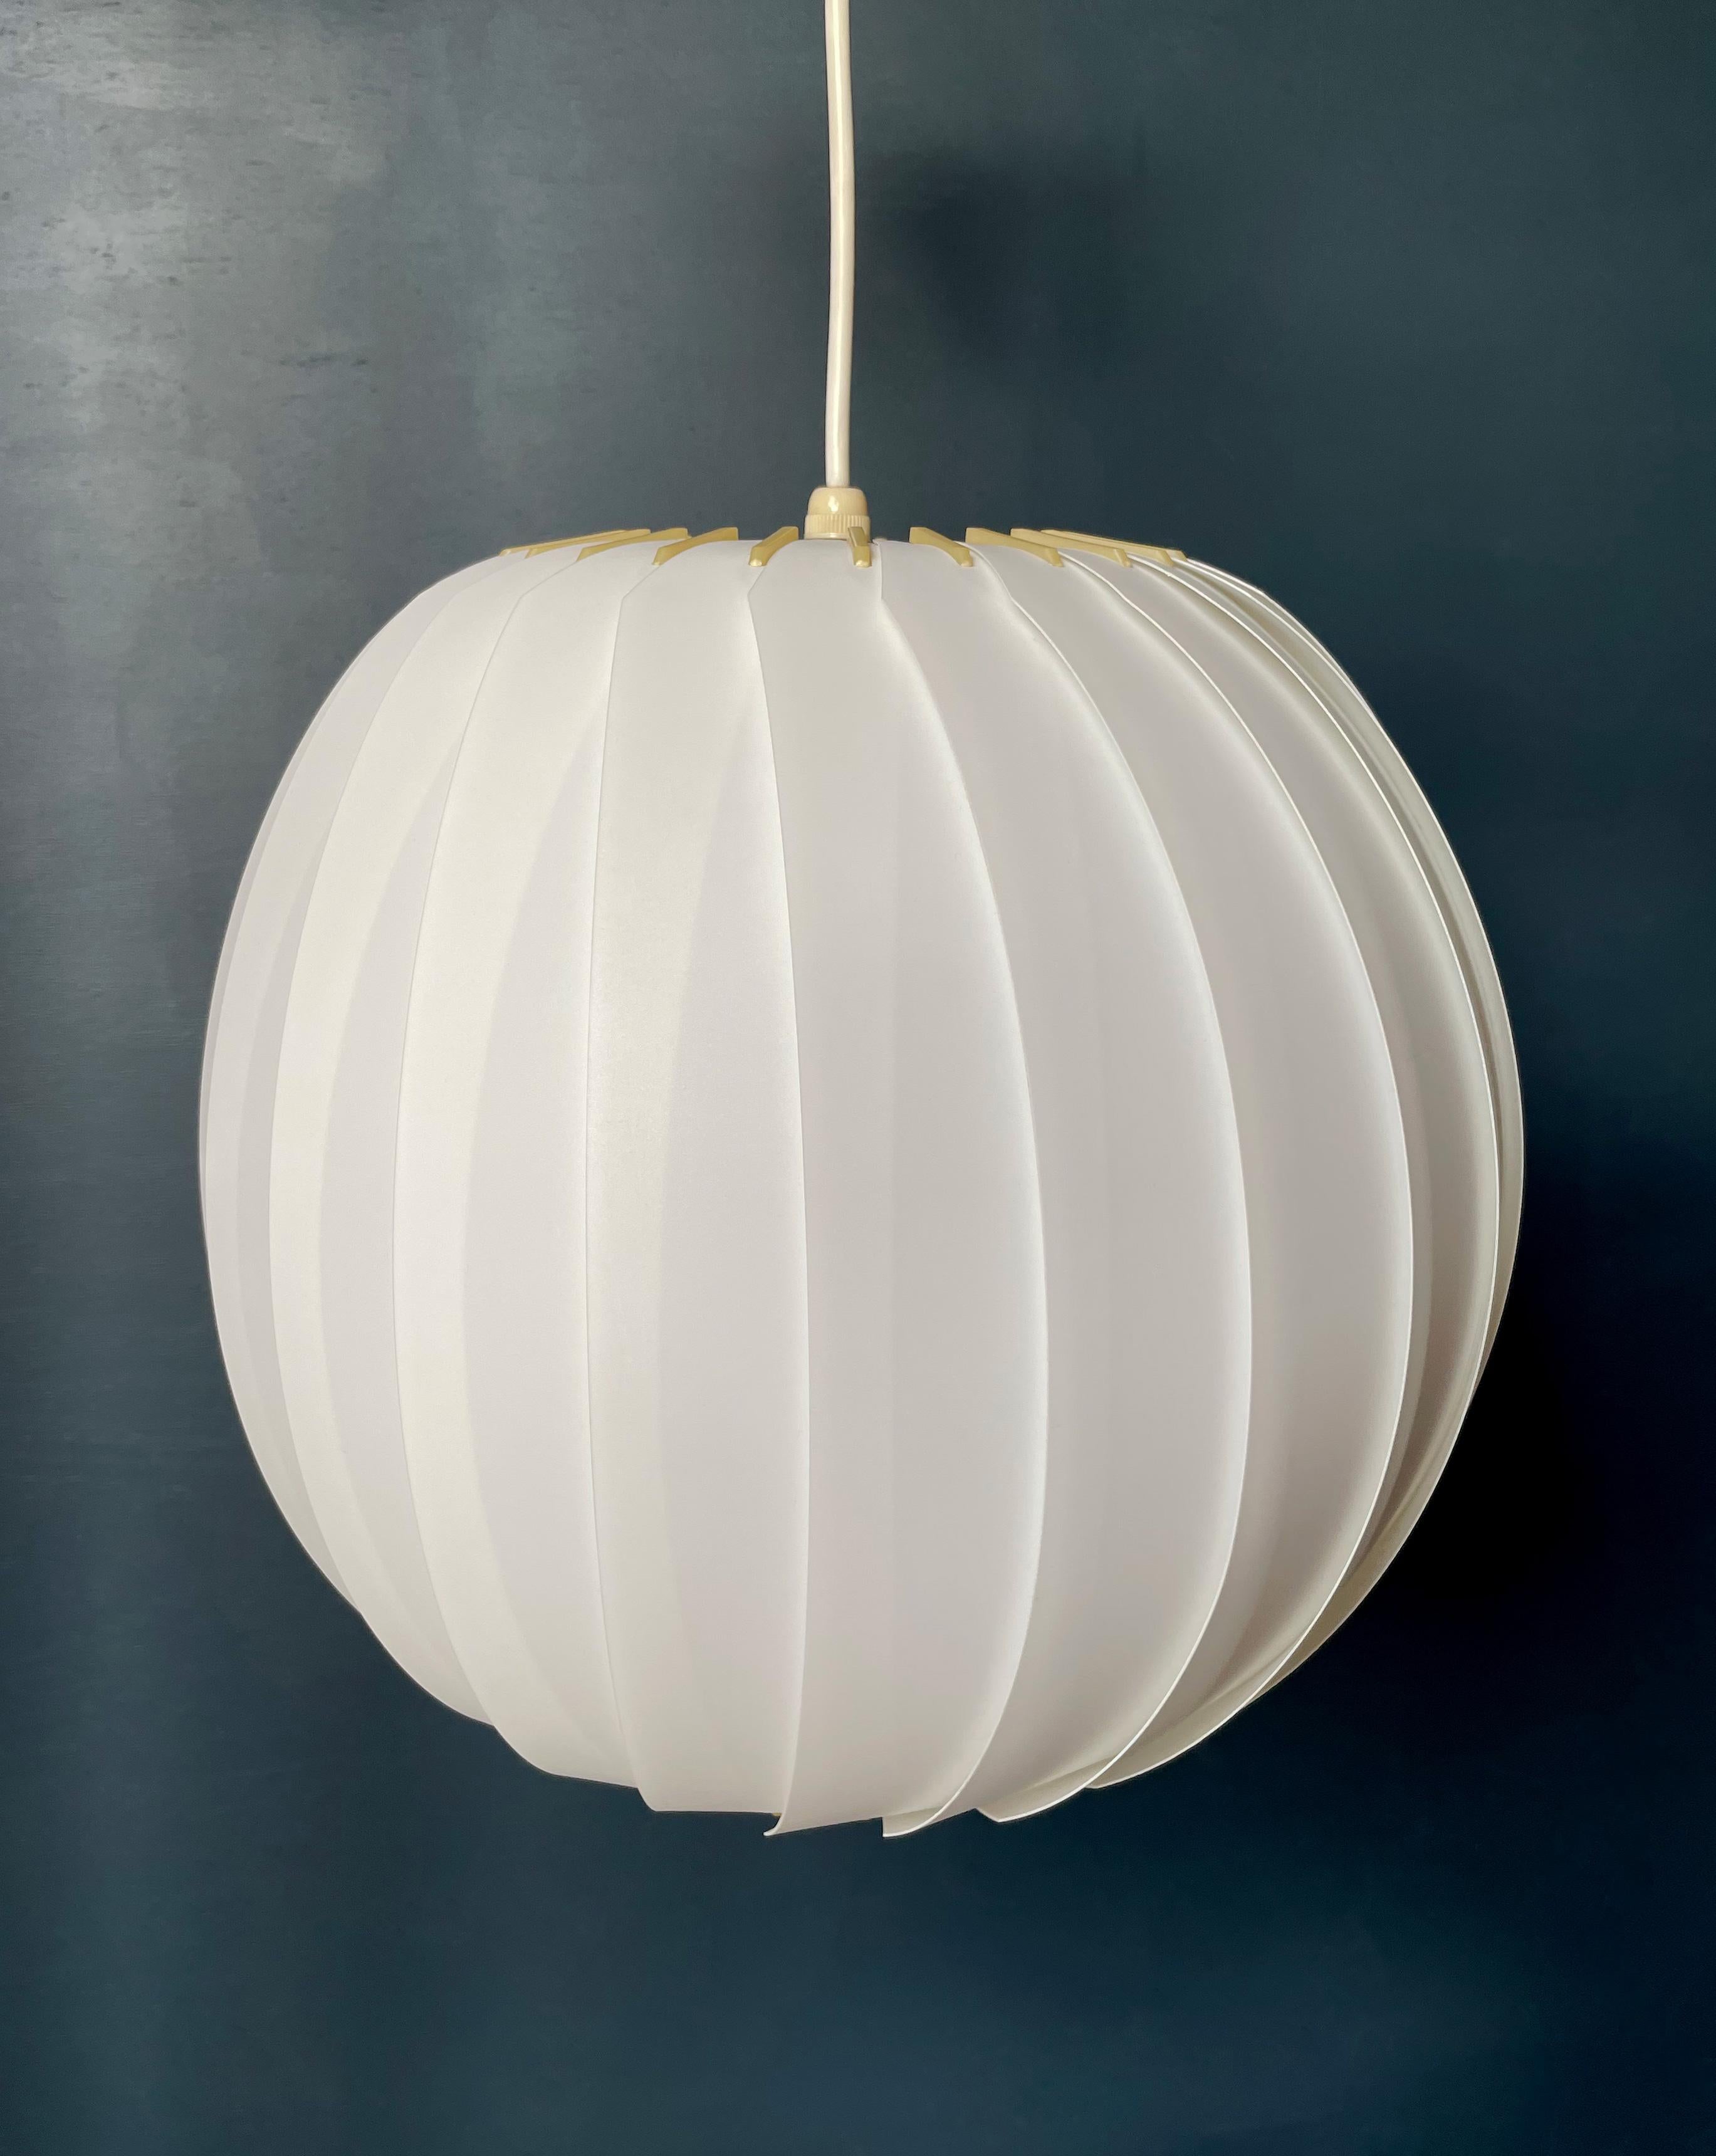 Minimalist Scandinavian Mid-Century Modern white acrylic pendant consisting of layered white, textured strips gathered on top and bottom with cream yellow acrylic strips. Designed in 1972 by Lars Eiler Schiøler (1913-1982) for Høyrup Light. Model